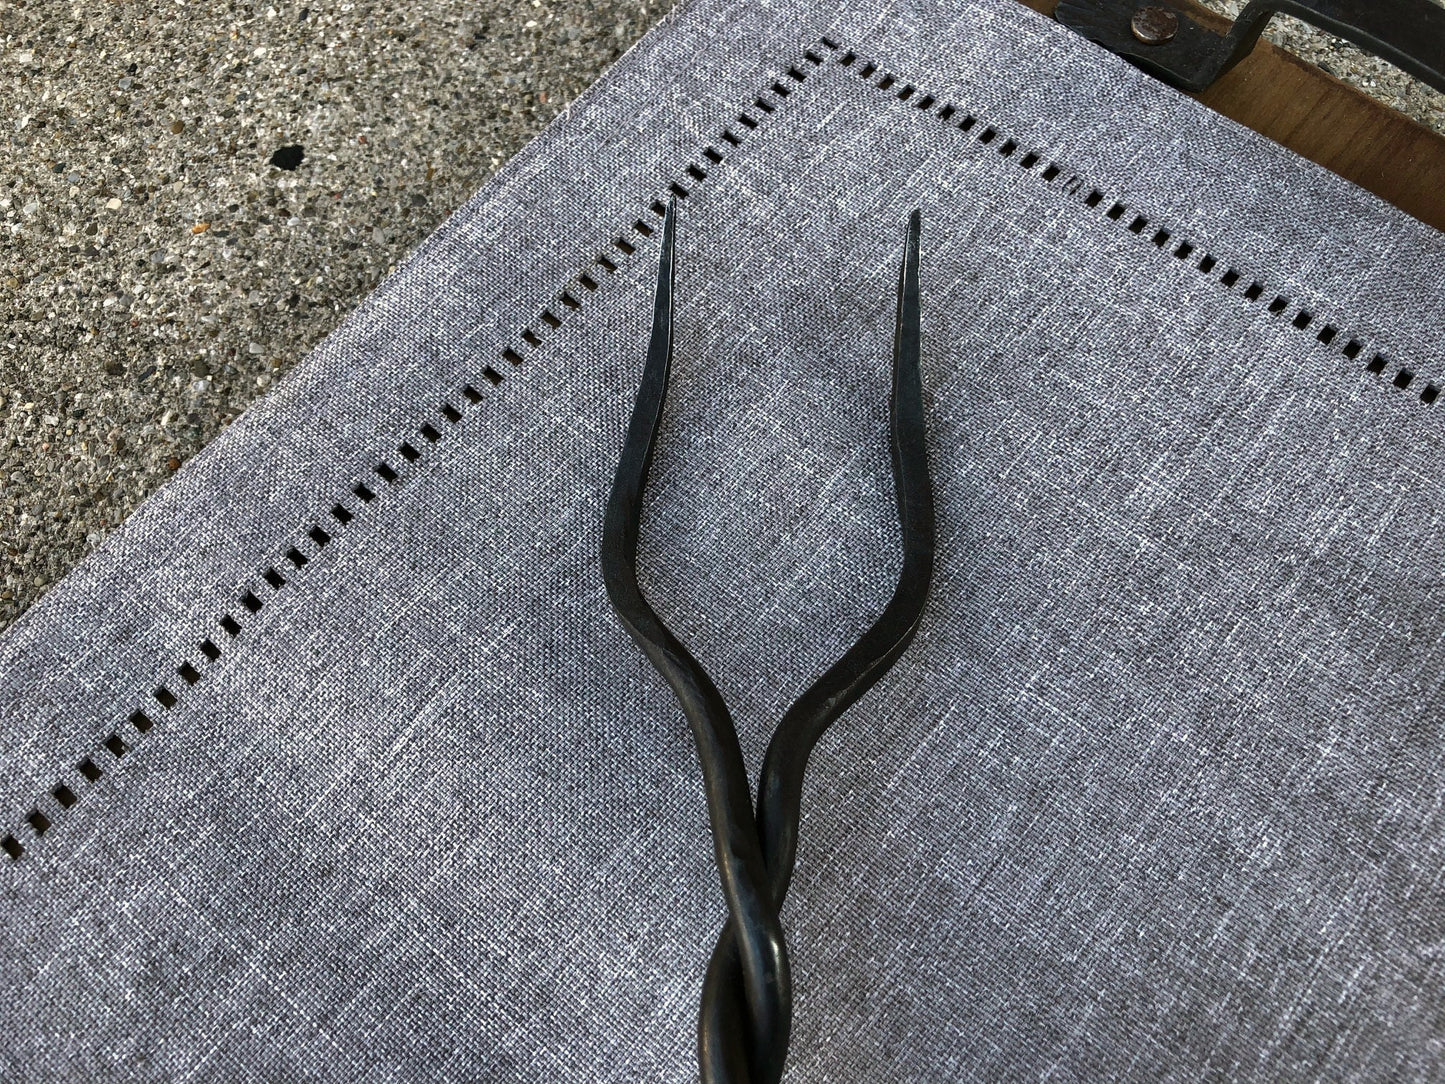 Heirloom Serving Fork, Hand Forged, Steel Fork, Grill Tools, Kitchen, Grilling Gifts, Kitchen, Father's Day